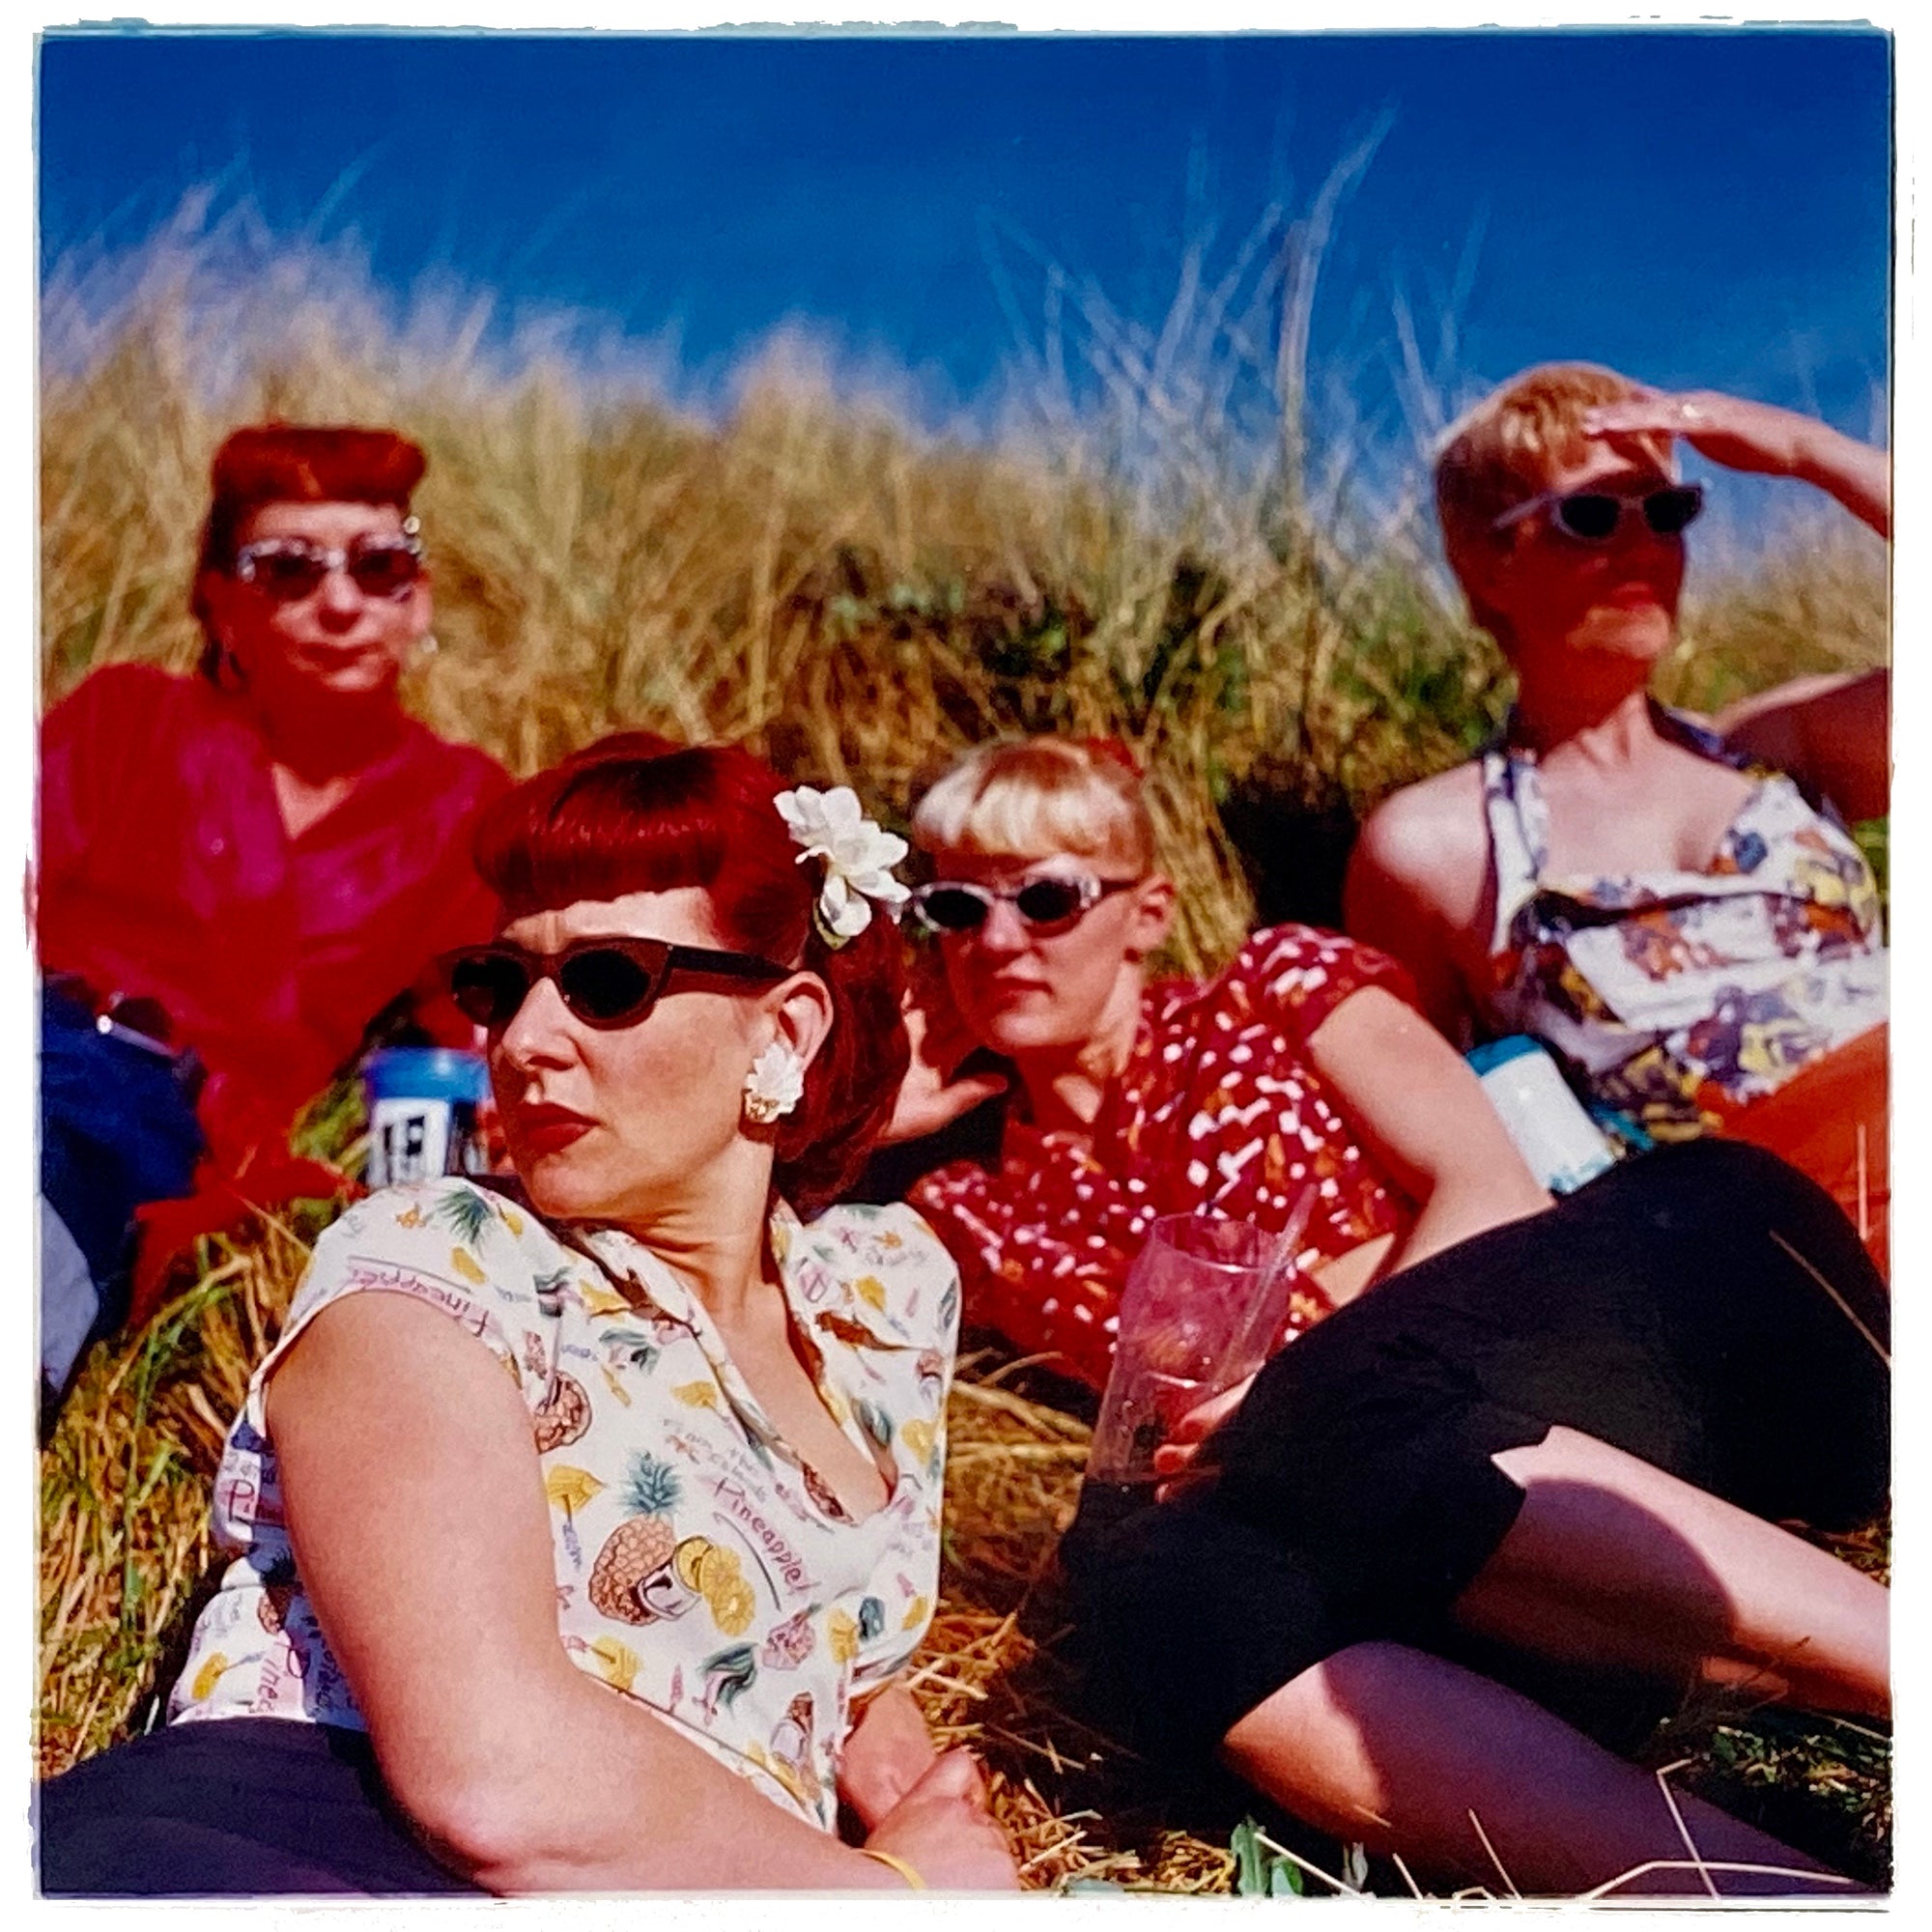 Photograph by Richard Heeps. A photo of four women dressed in a retro style all wearing sunglasses on a sunny day lounging on a hill with high grass.